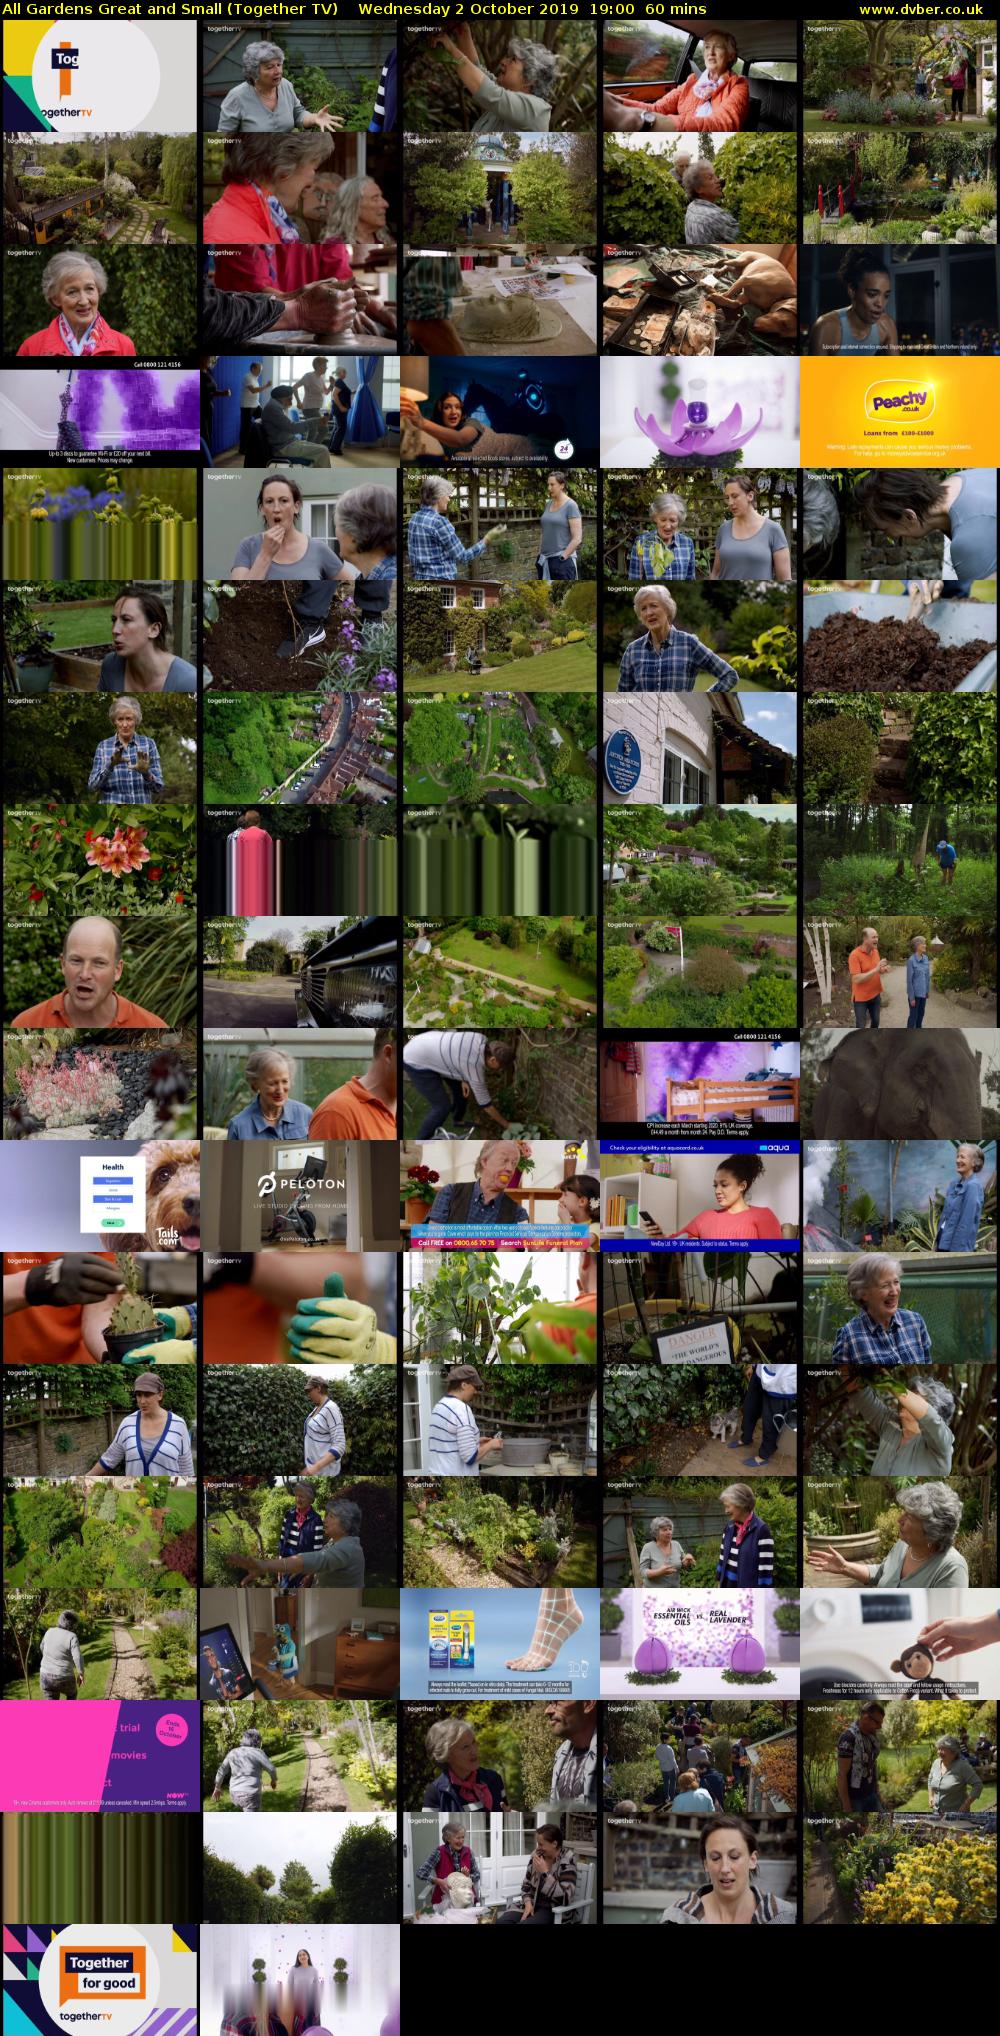 All Gardens Great and Small (Together TV) Wednesday 2 October 2019 19:00 - 20:00